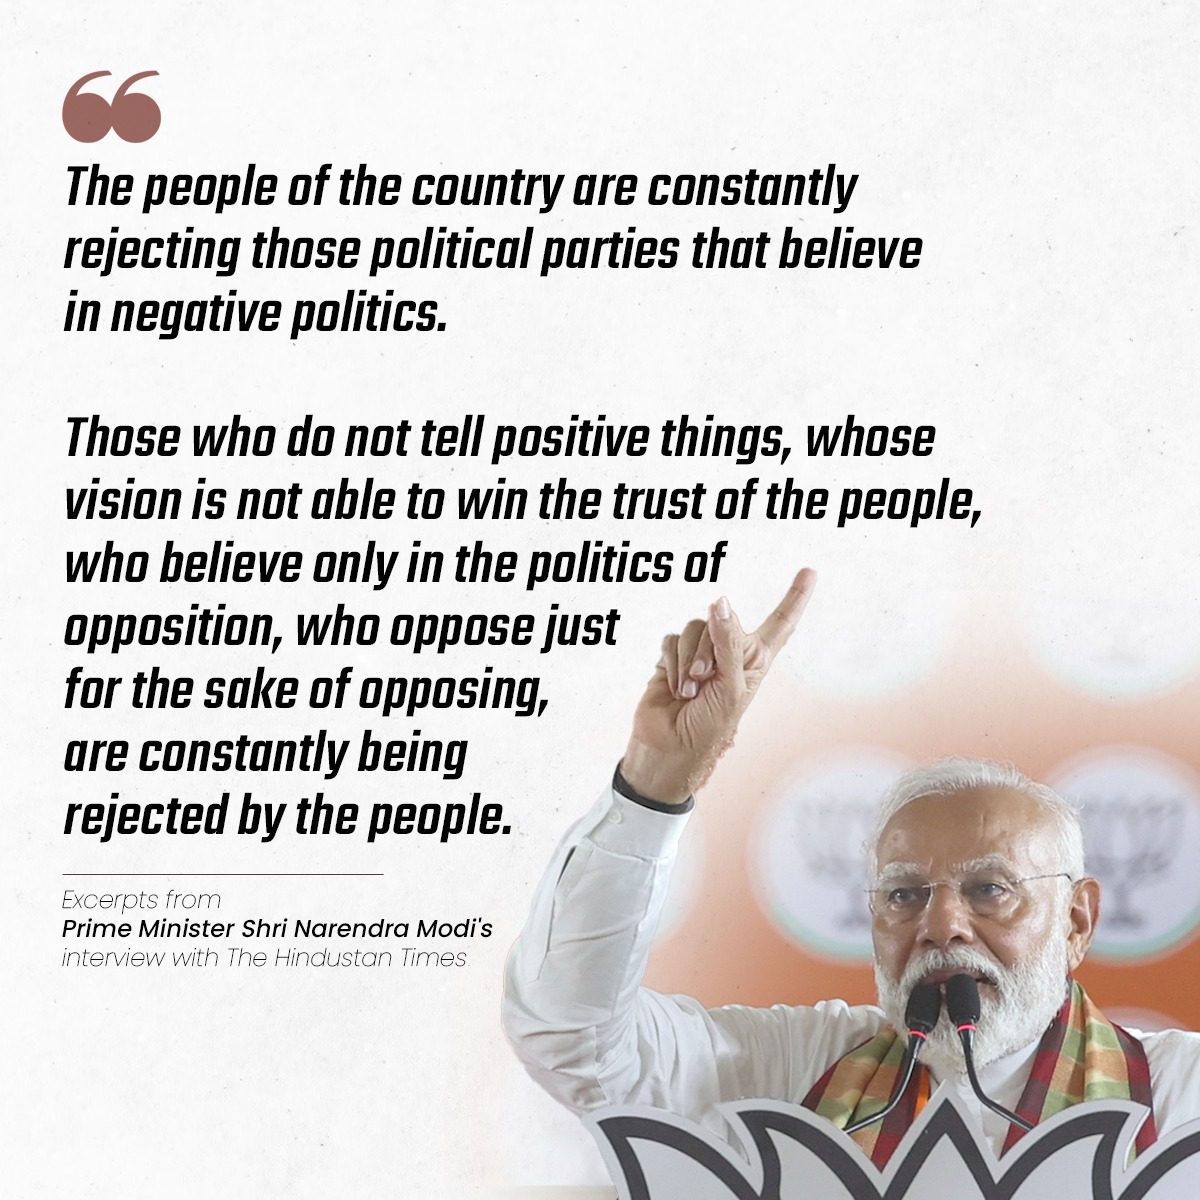 The people of the country are constantly rejecting those political parties that believe in negative politics. - PM @narendramodi